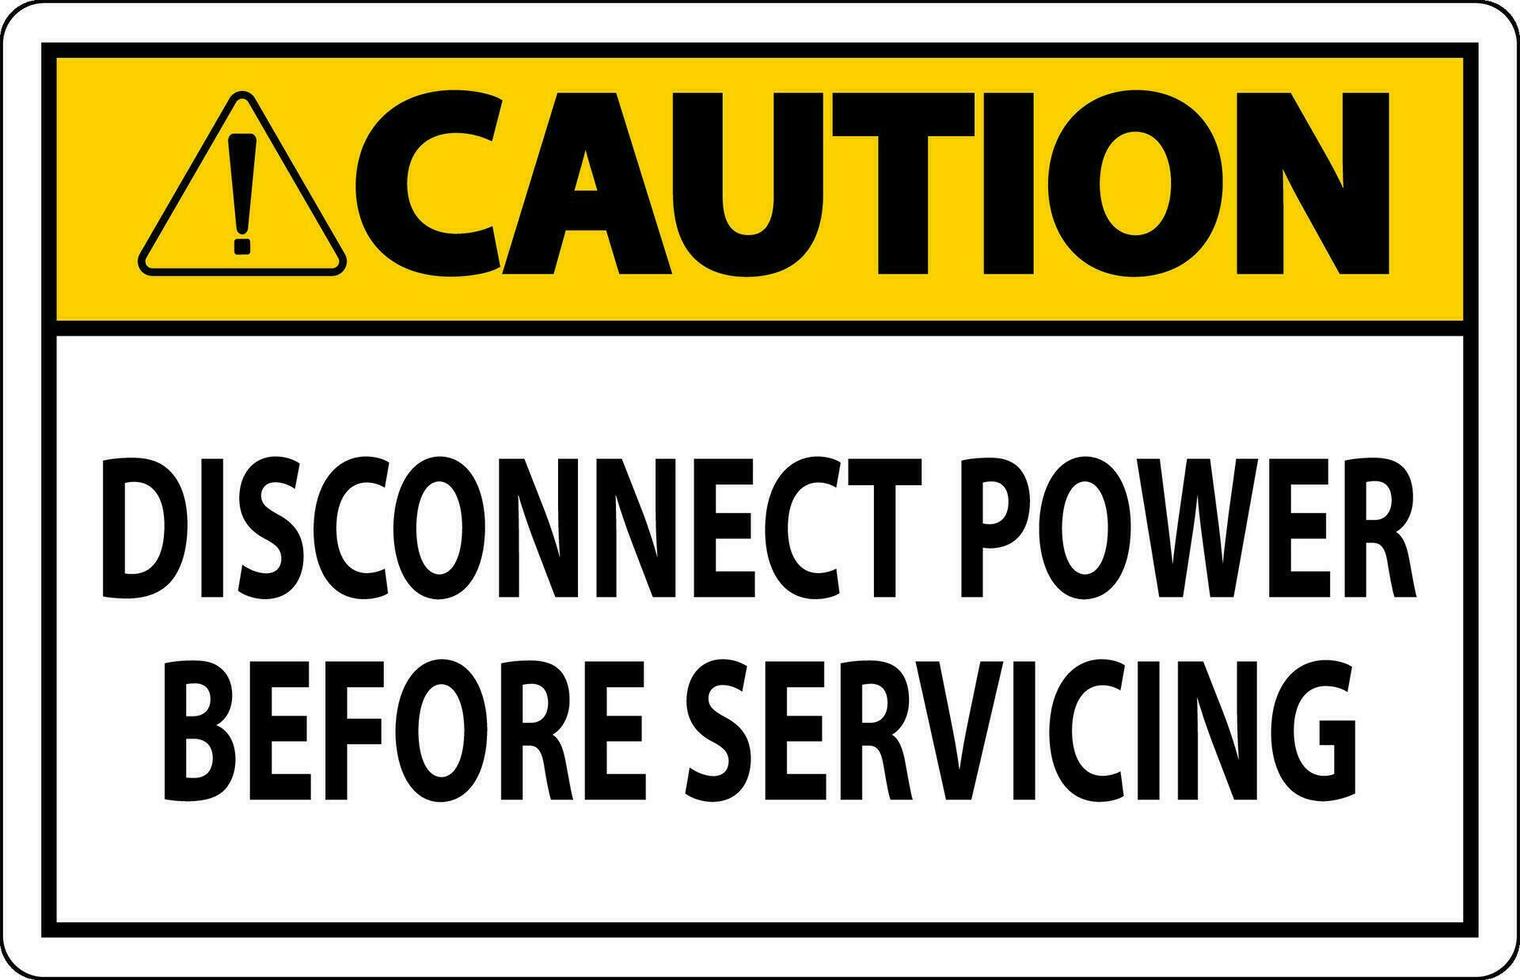 Caution Sign Disconnect Power Before Servicing vector